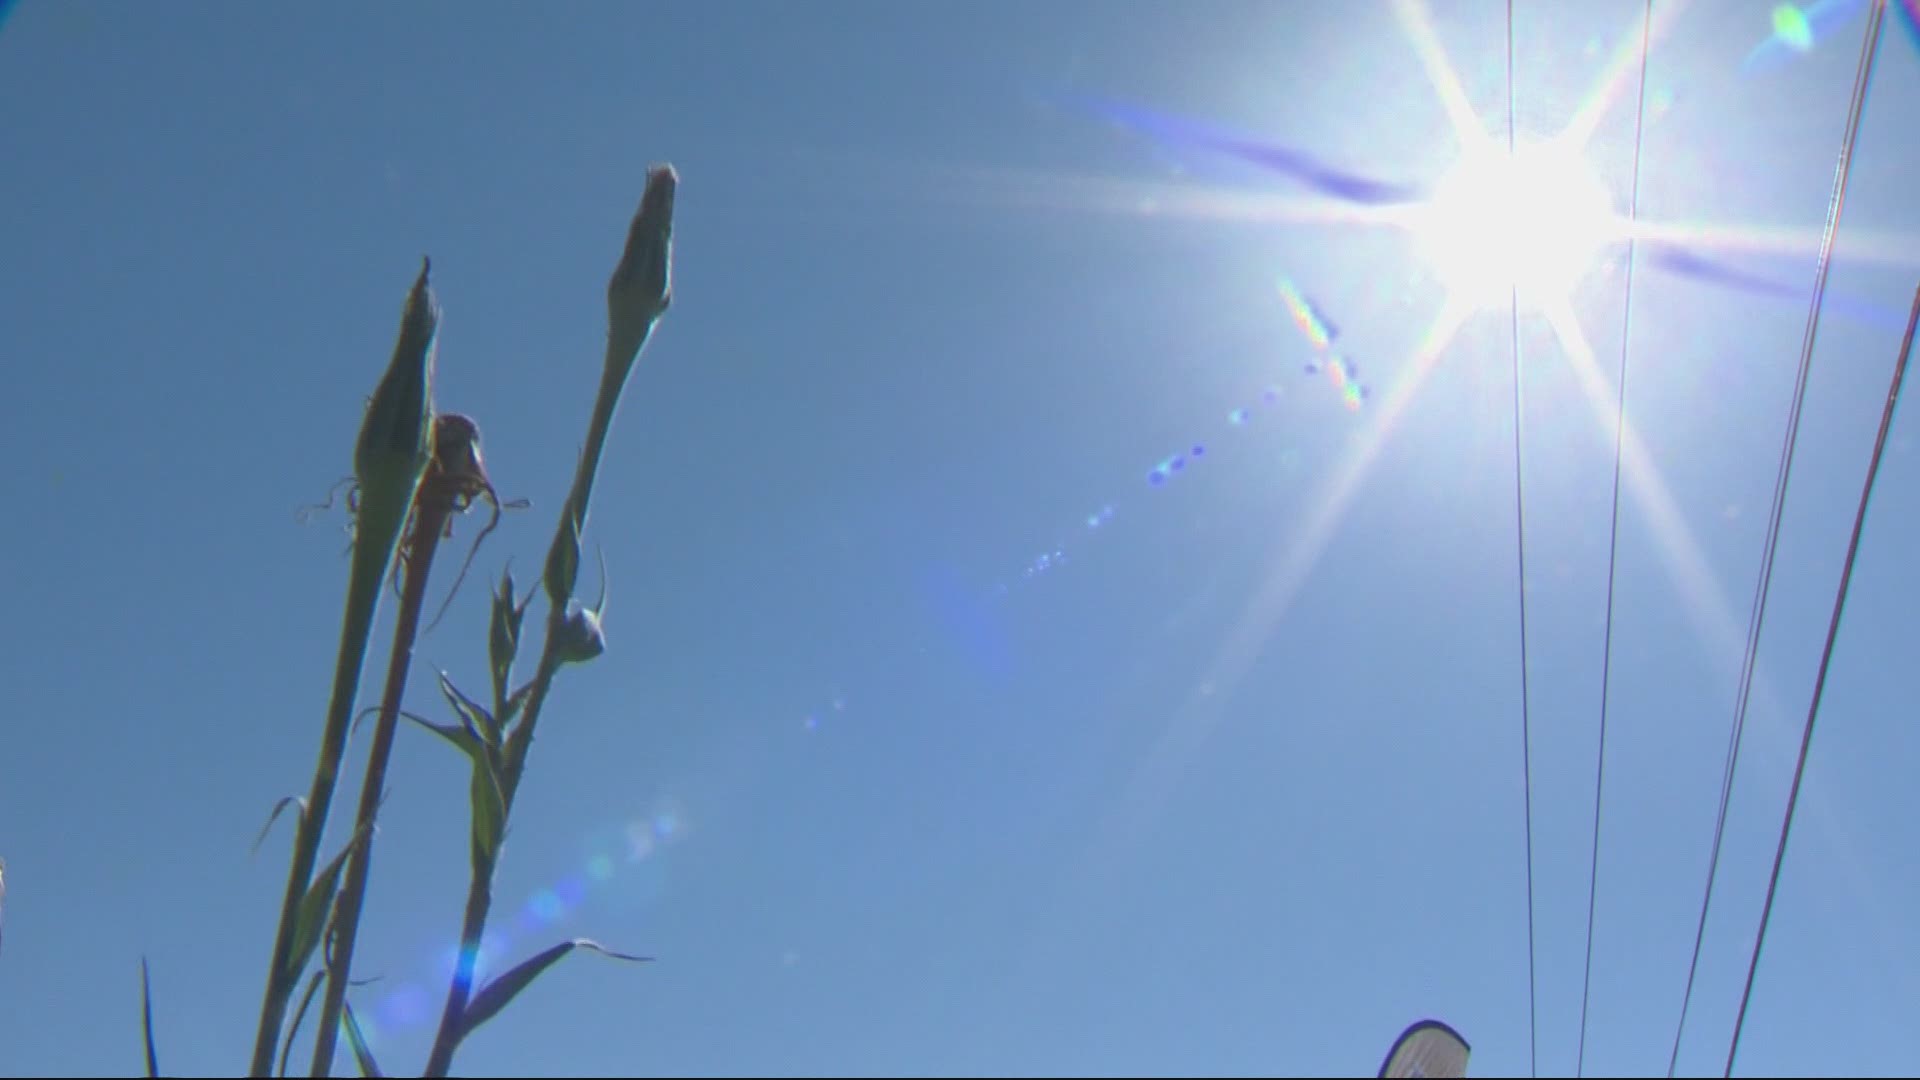 At least 63 people have died due to extreme heat in Oregon since a historic heat wave began last week, the Oregon State Medical Examiner's Office said June 30, 2021.